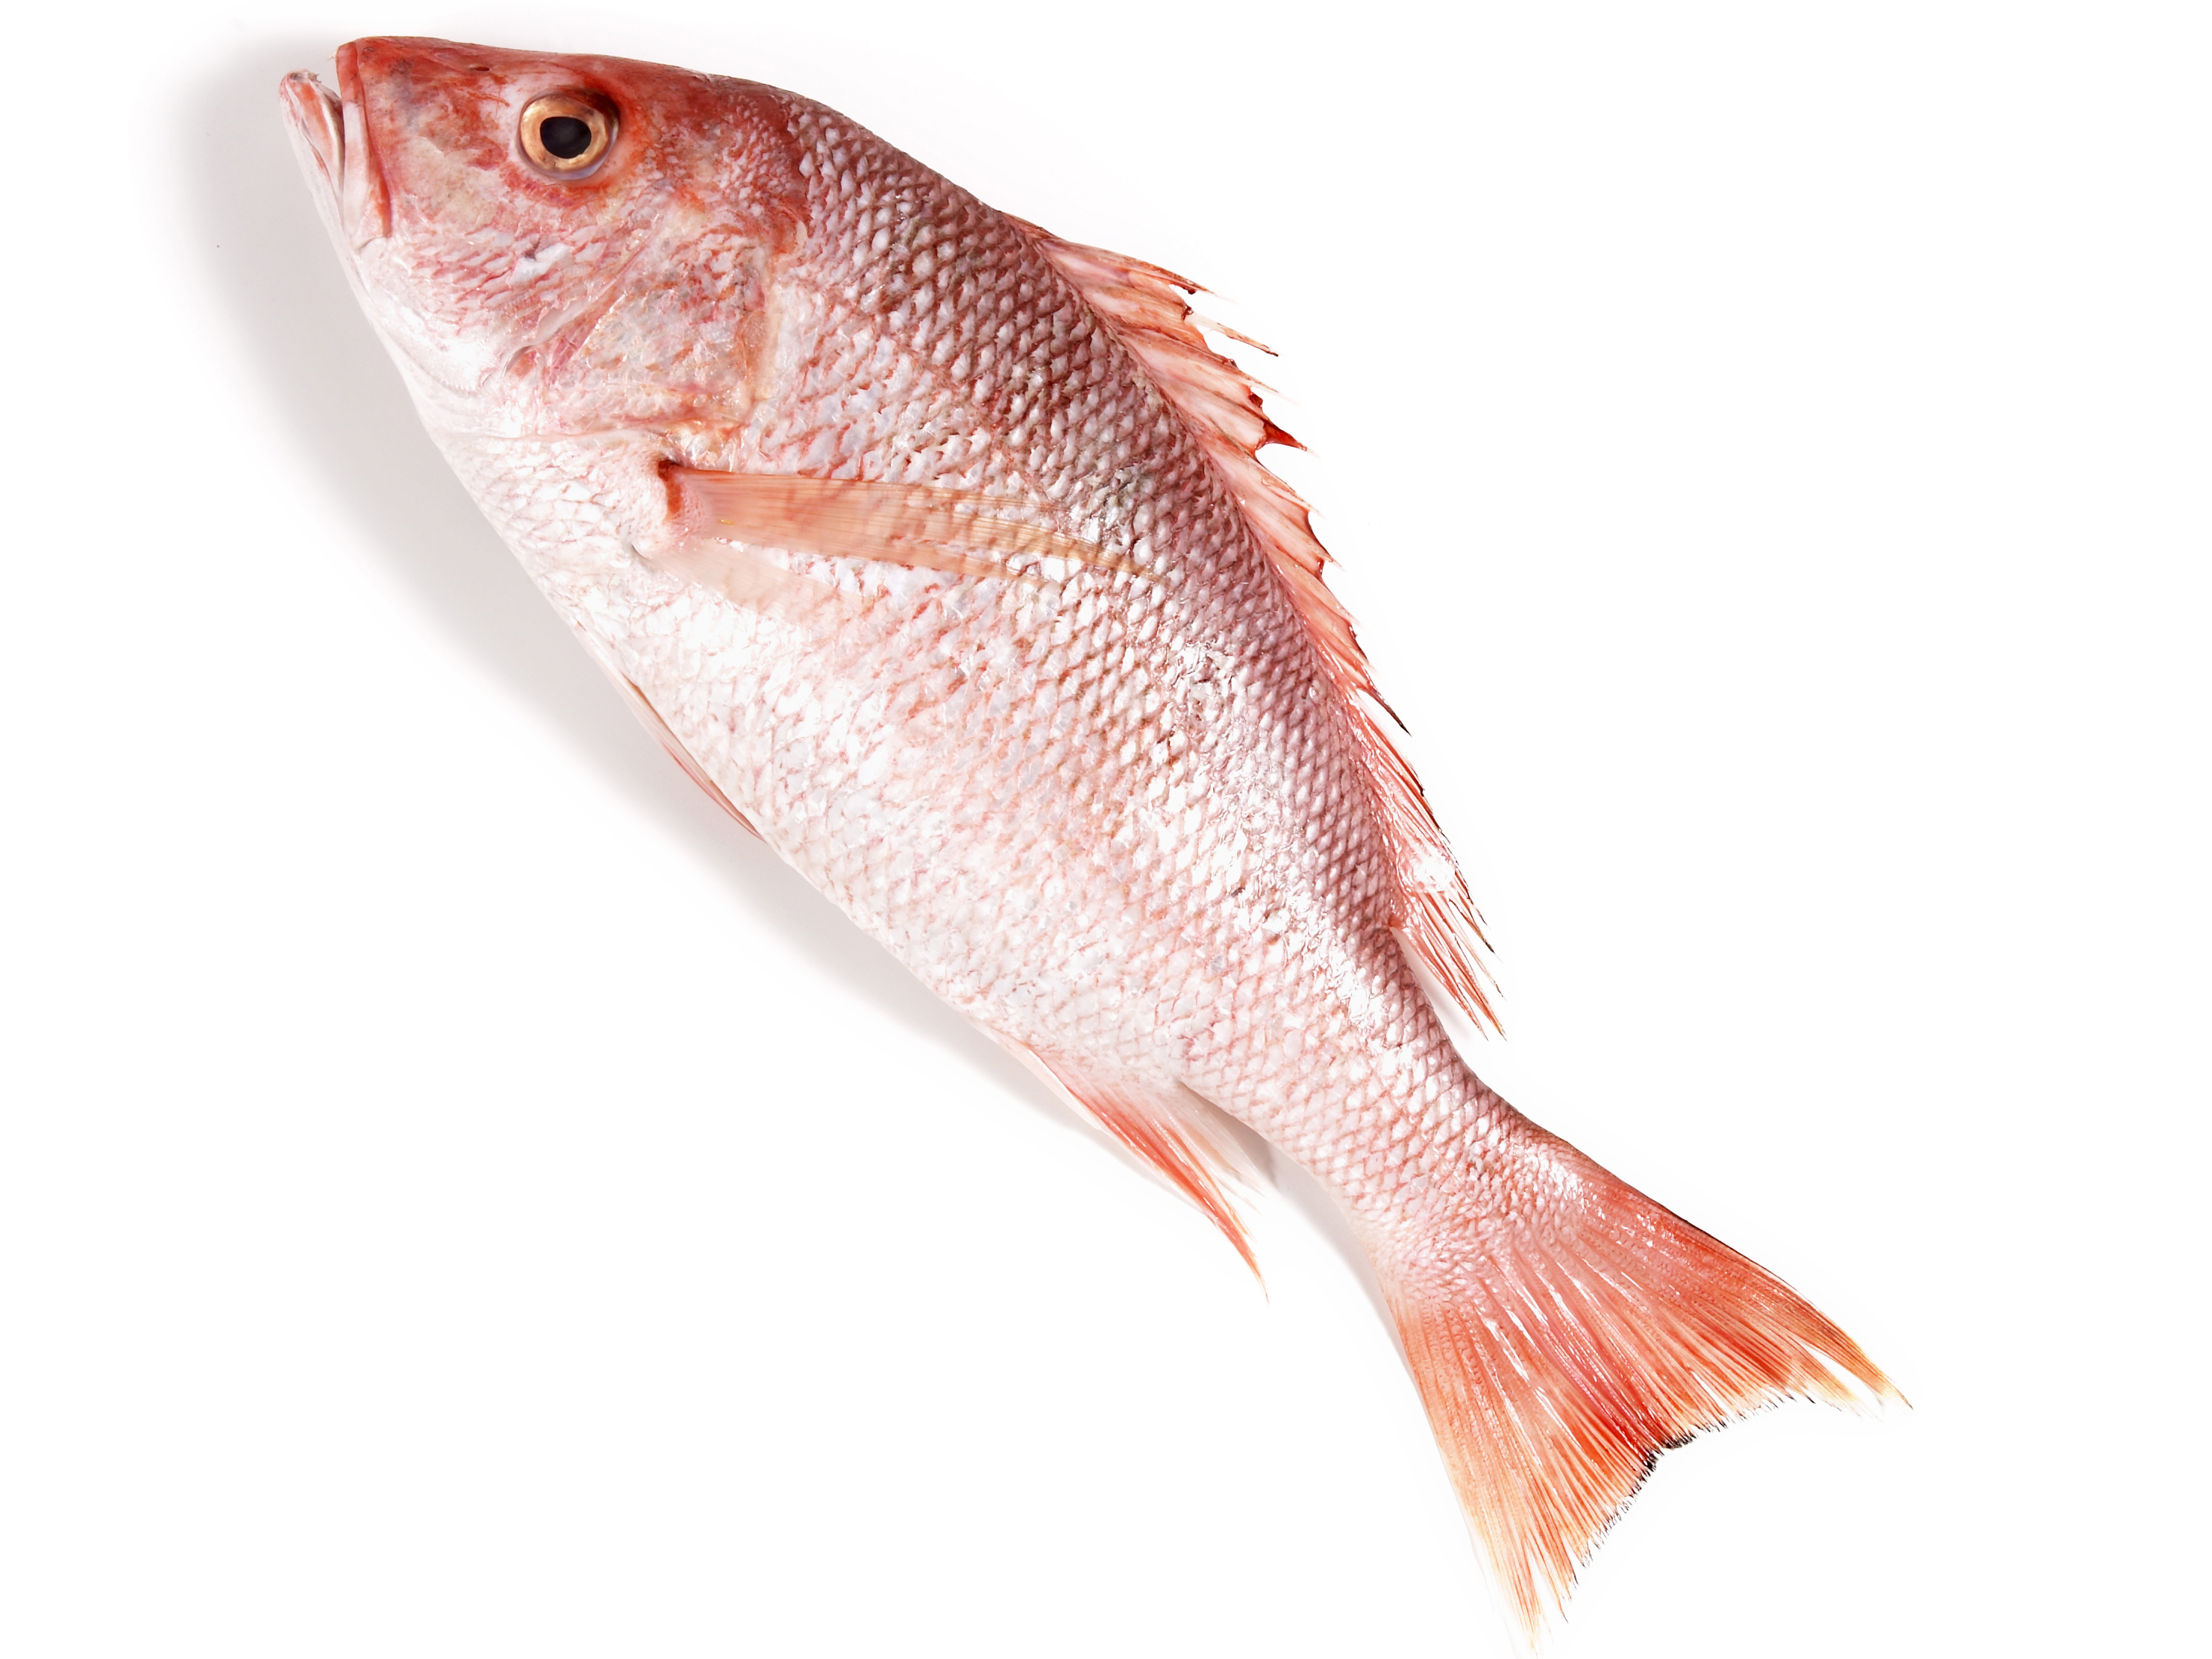 red snapper bengali name